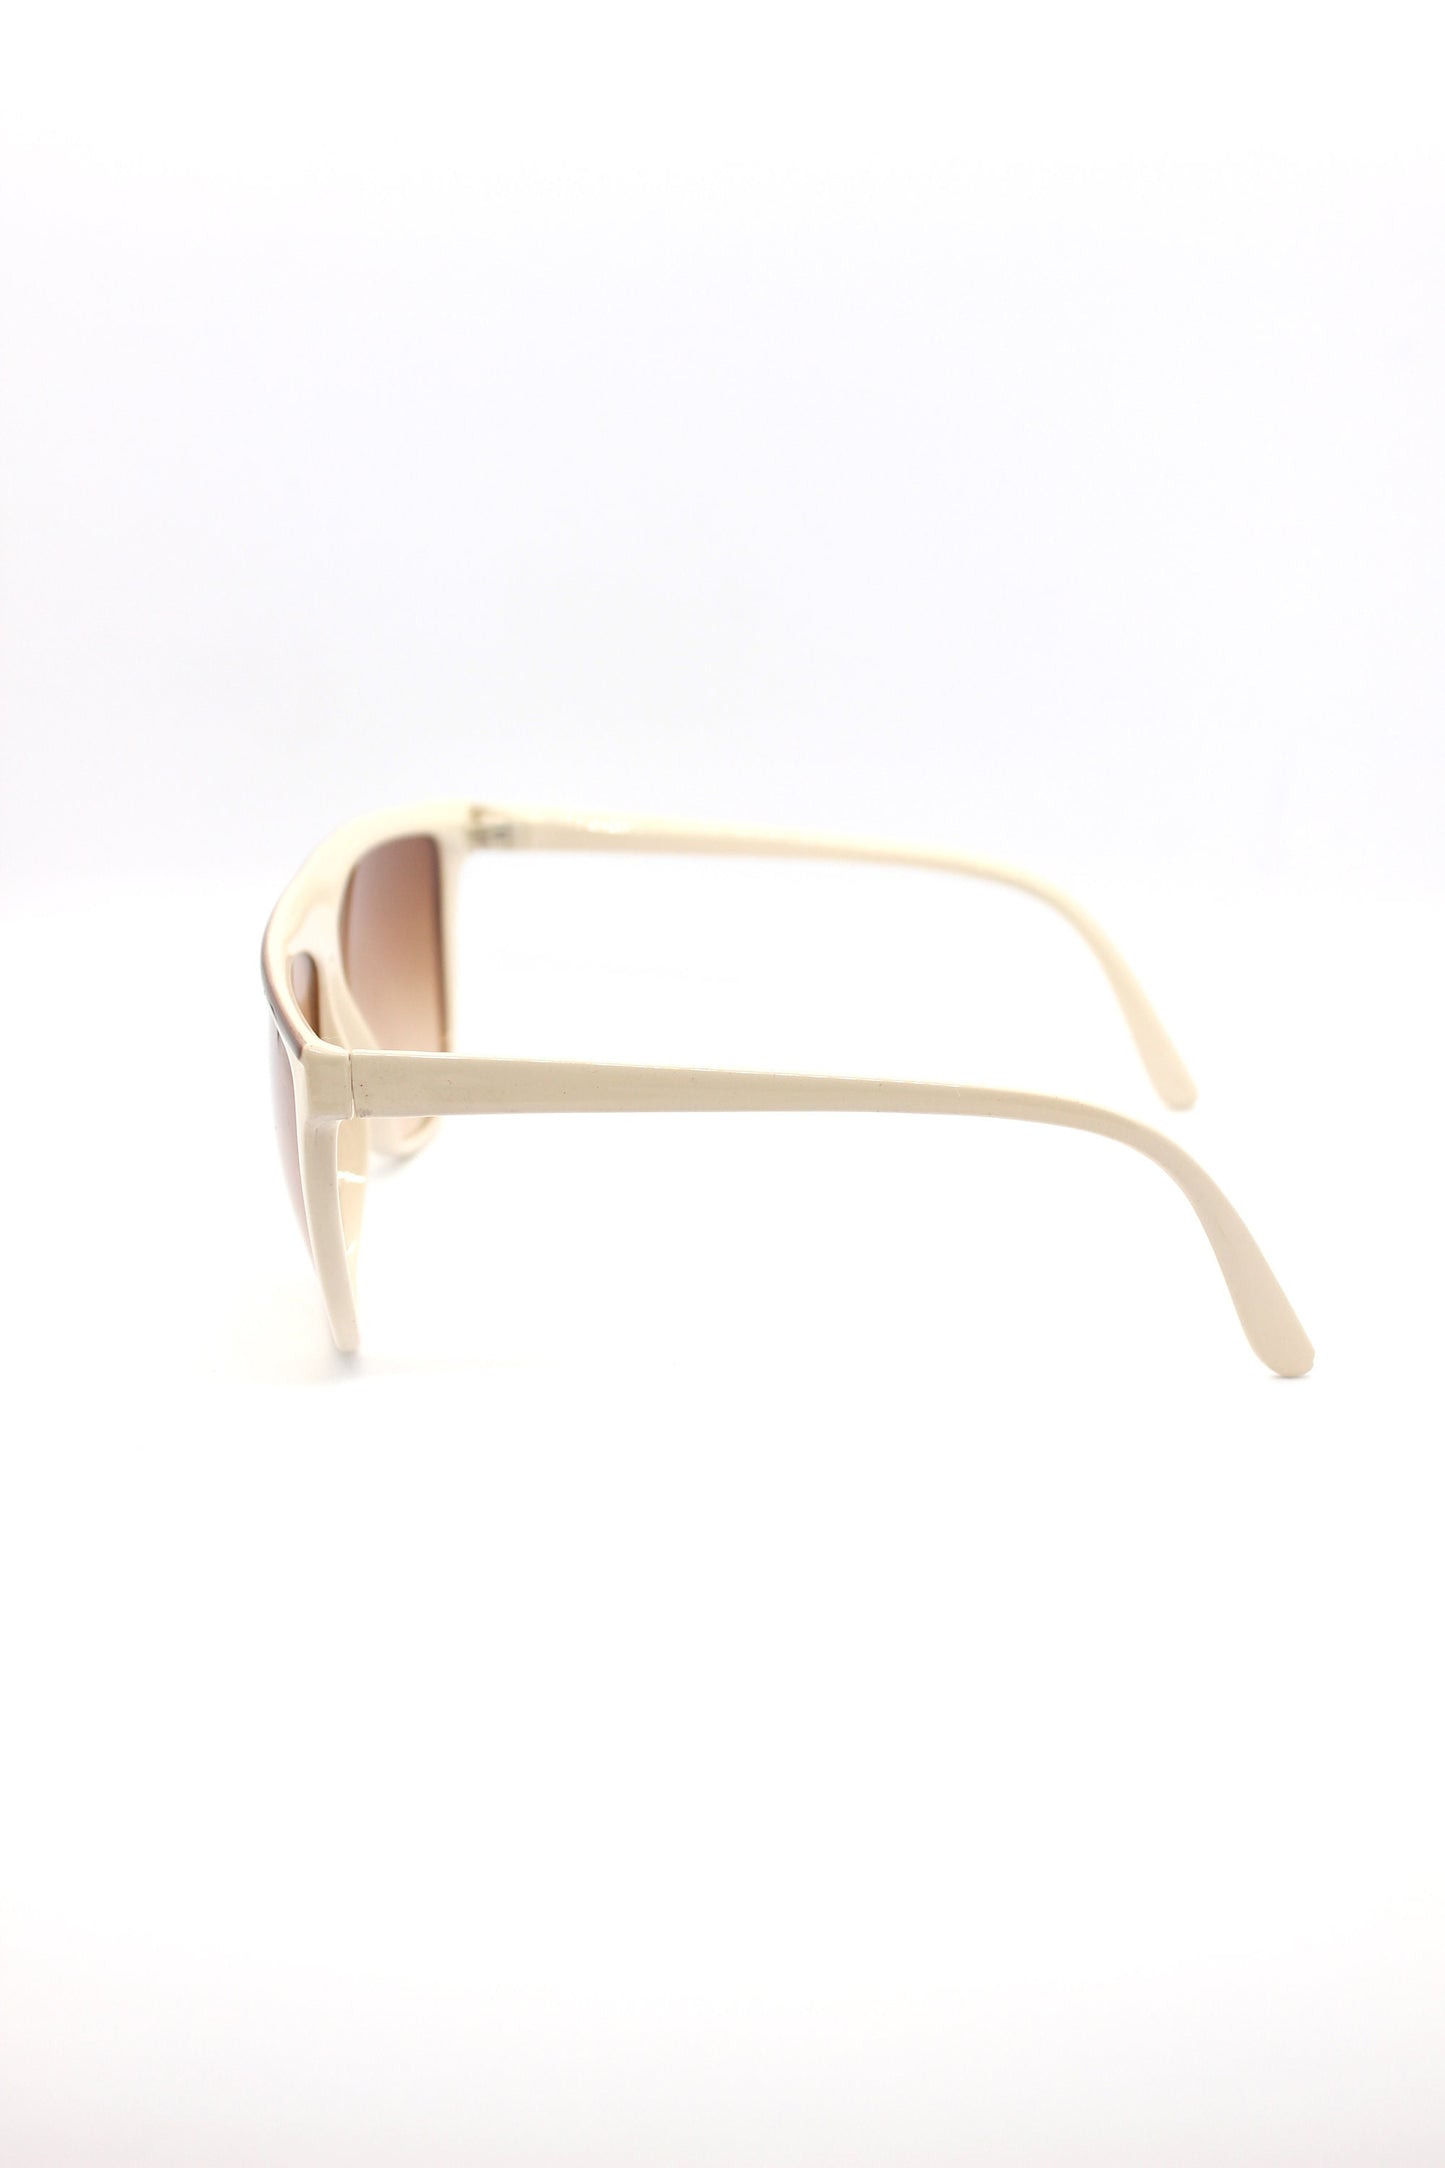 VINTAGE SUNGLASSES never worn. White and brown frame with gradient lenses